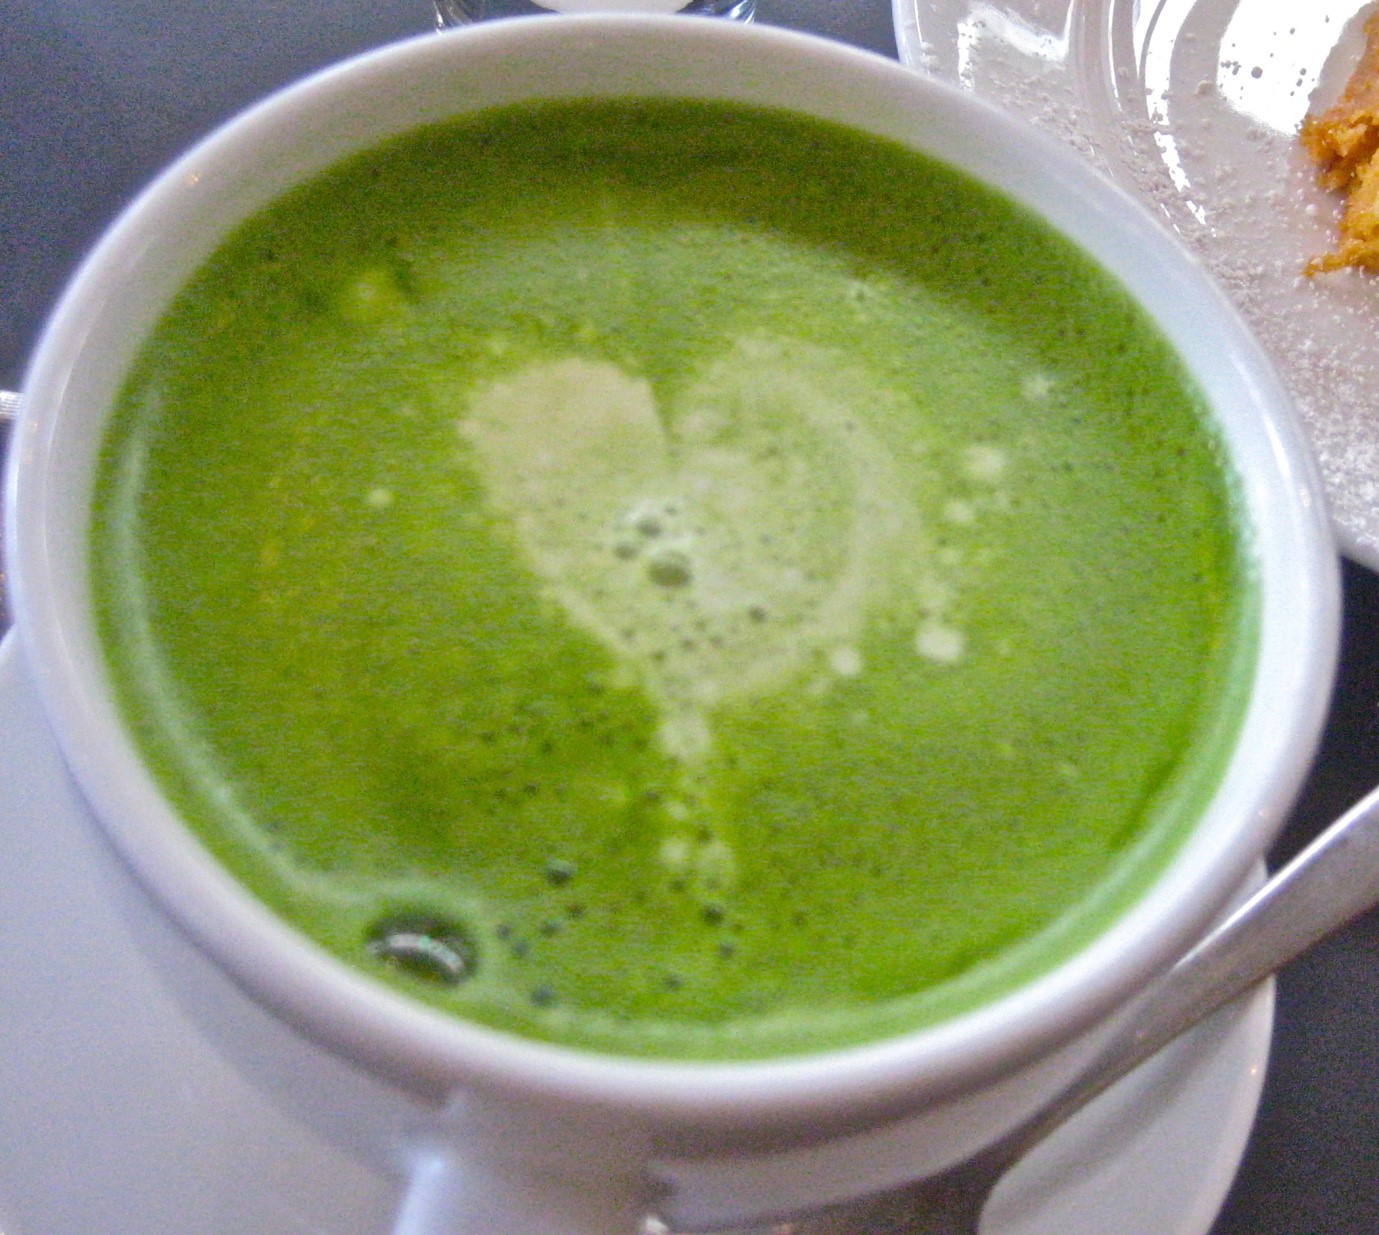 Drink Matcha Tea and Get Relieved